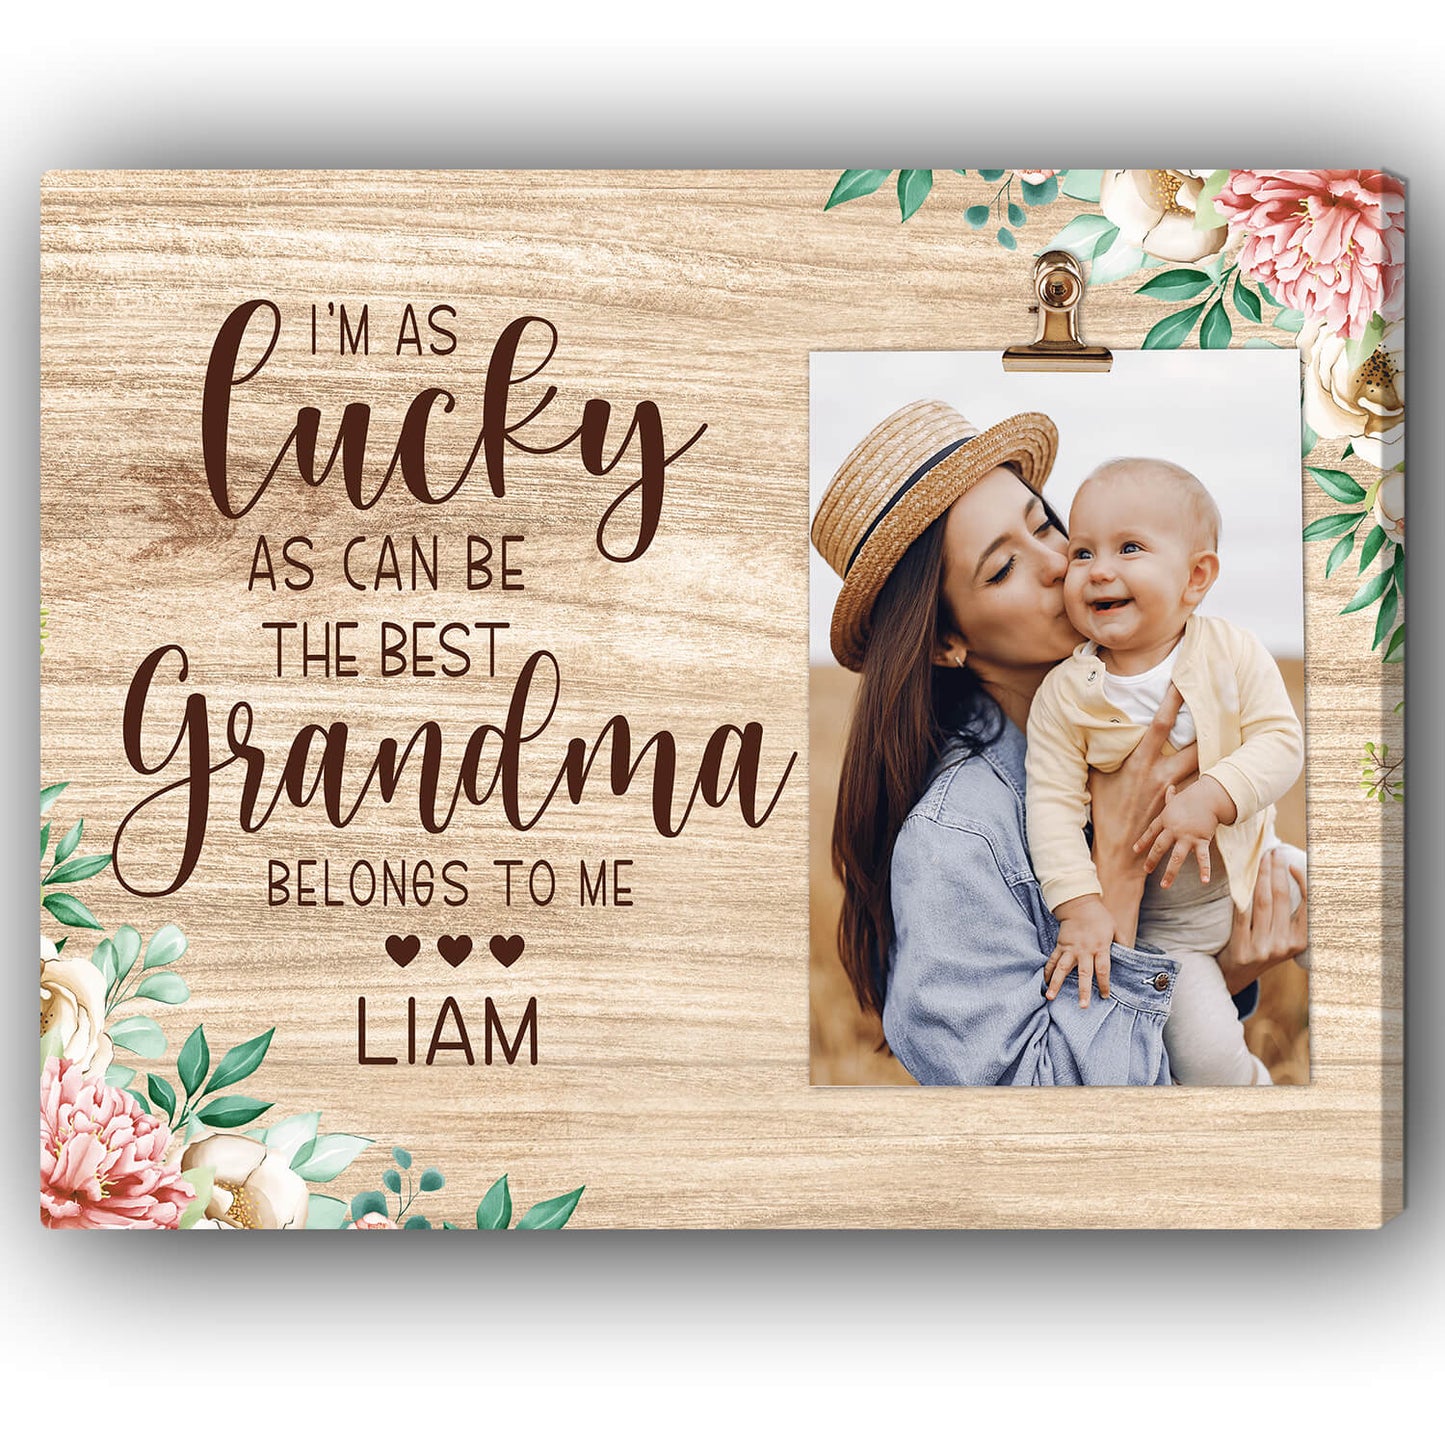 The Best Grandma Belongs To Me  - Personalized Mother's Day Gift For Grandma - Custom Photo Canvas Print - Mymindfulgifts